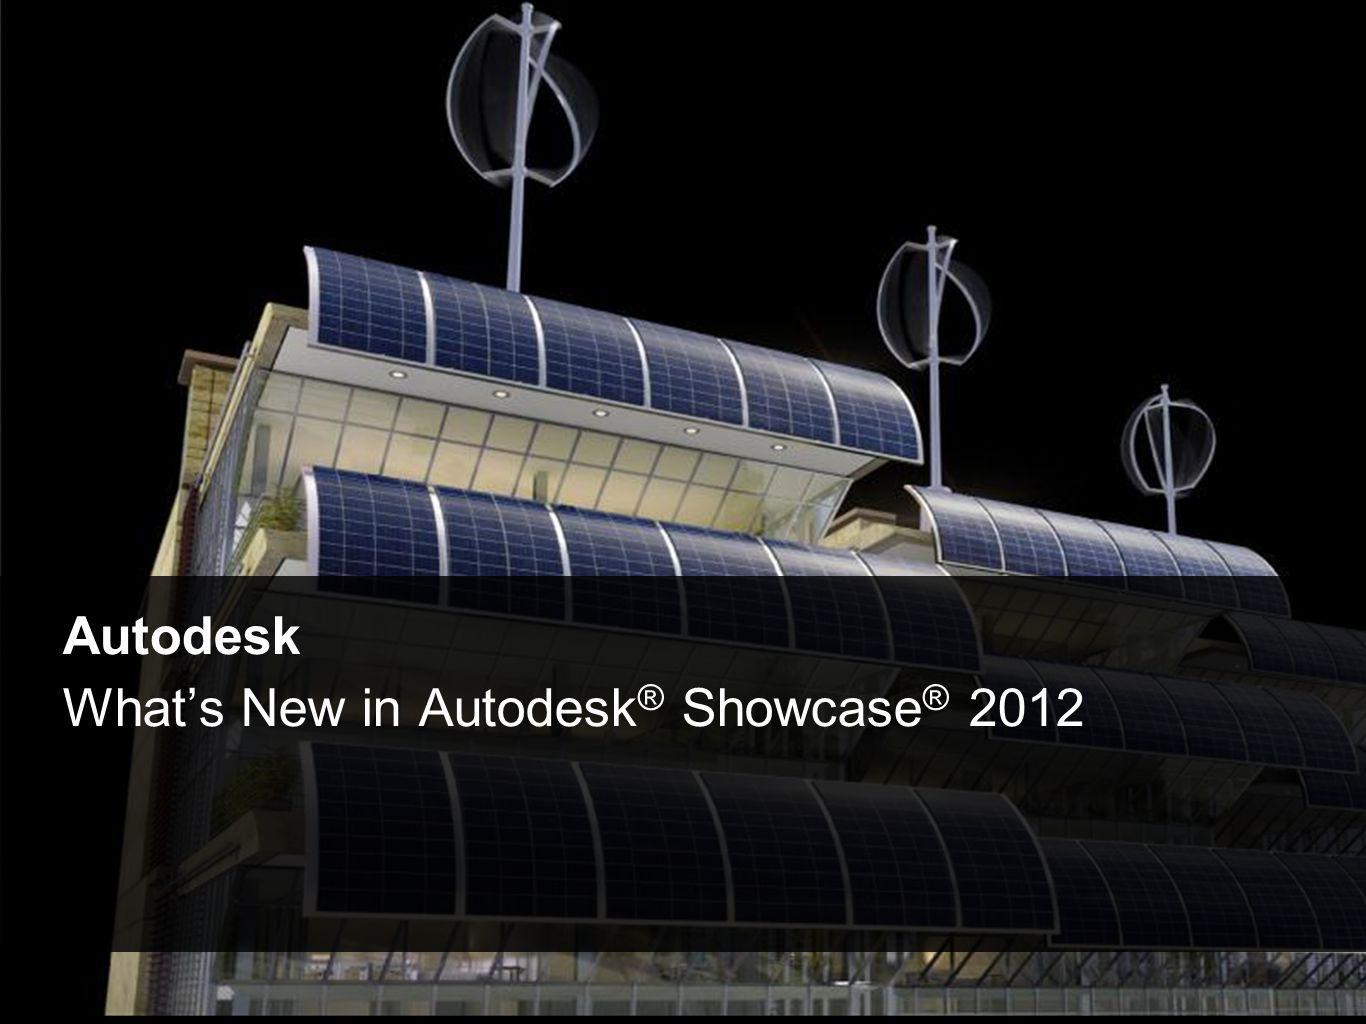 2011 Autodesk Autodesk What's New in Autodesk ® Showcase ® ppt download